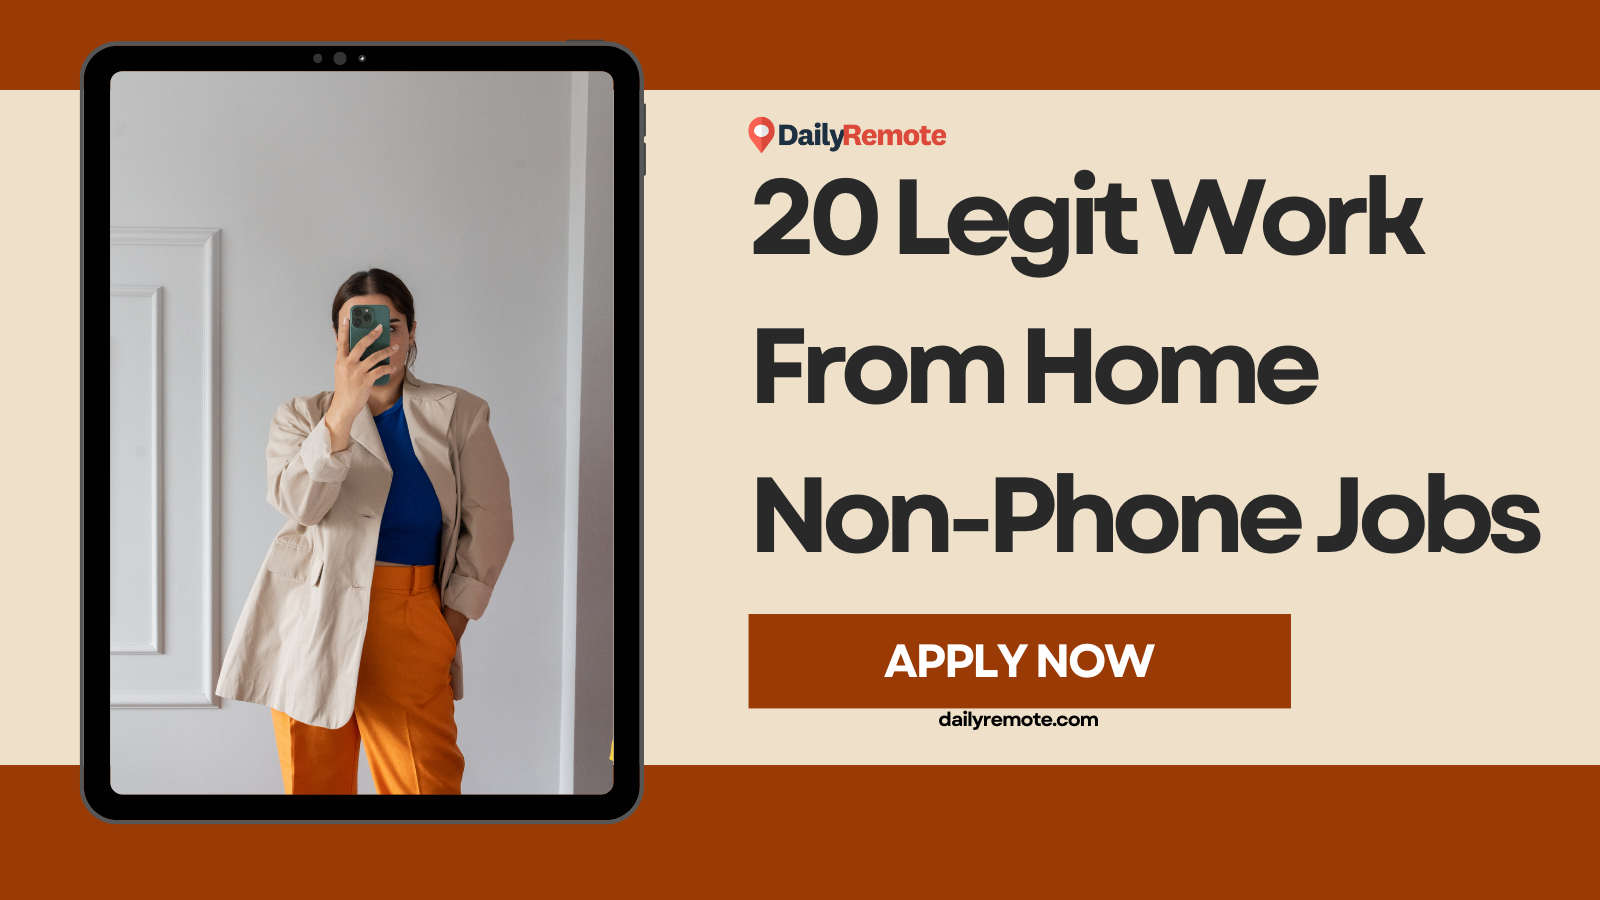 20 Legit Work From Home NonPhone Jobs